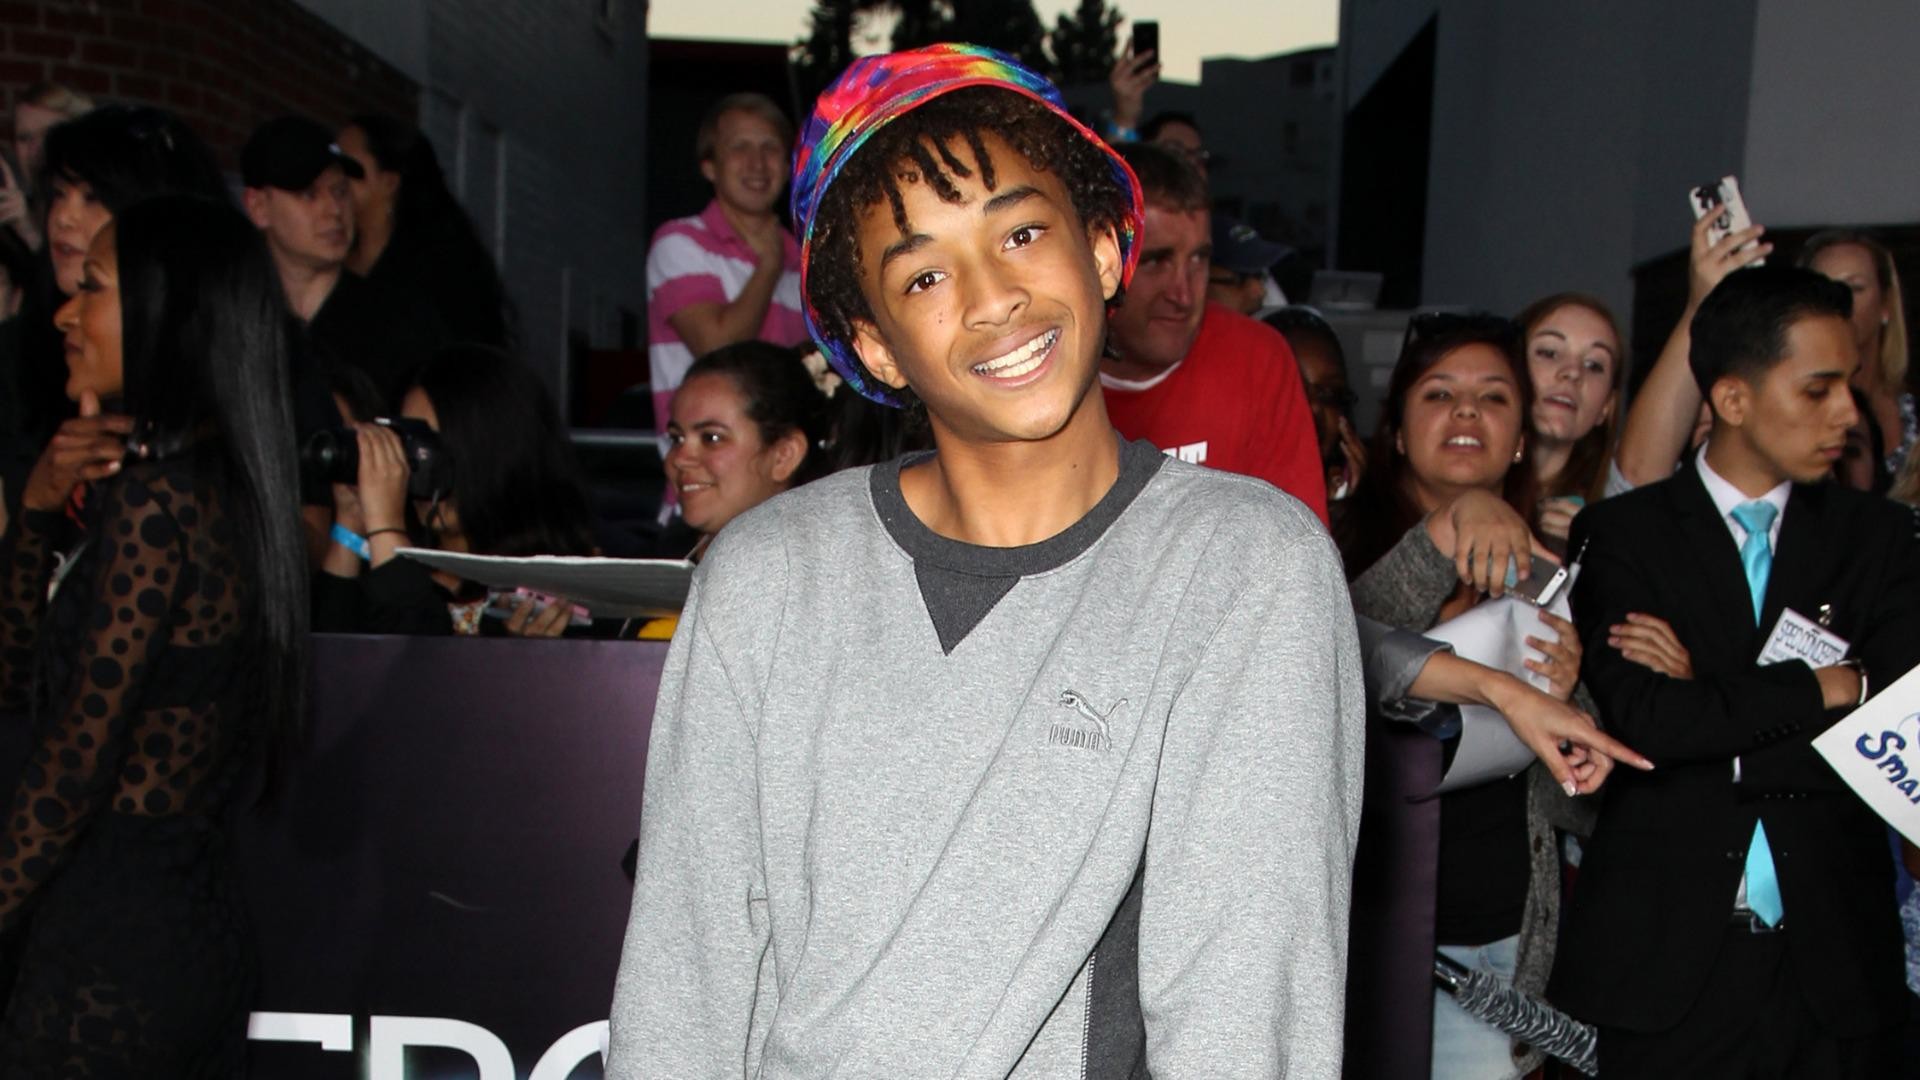 1920x1080 When it comes to Cody Simpson, Jaden Smith has a case of the green-